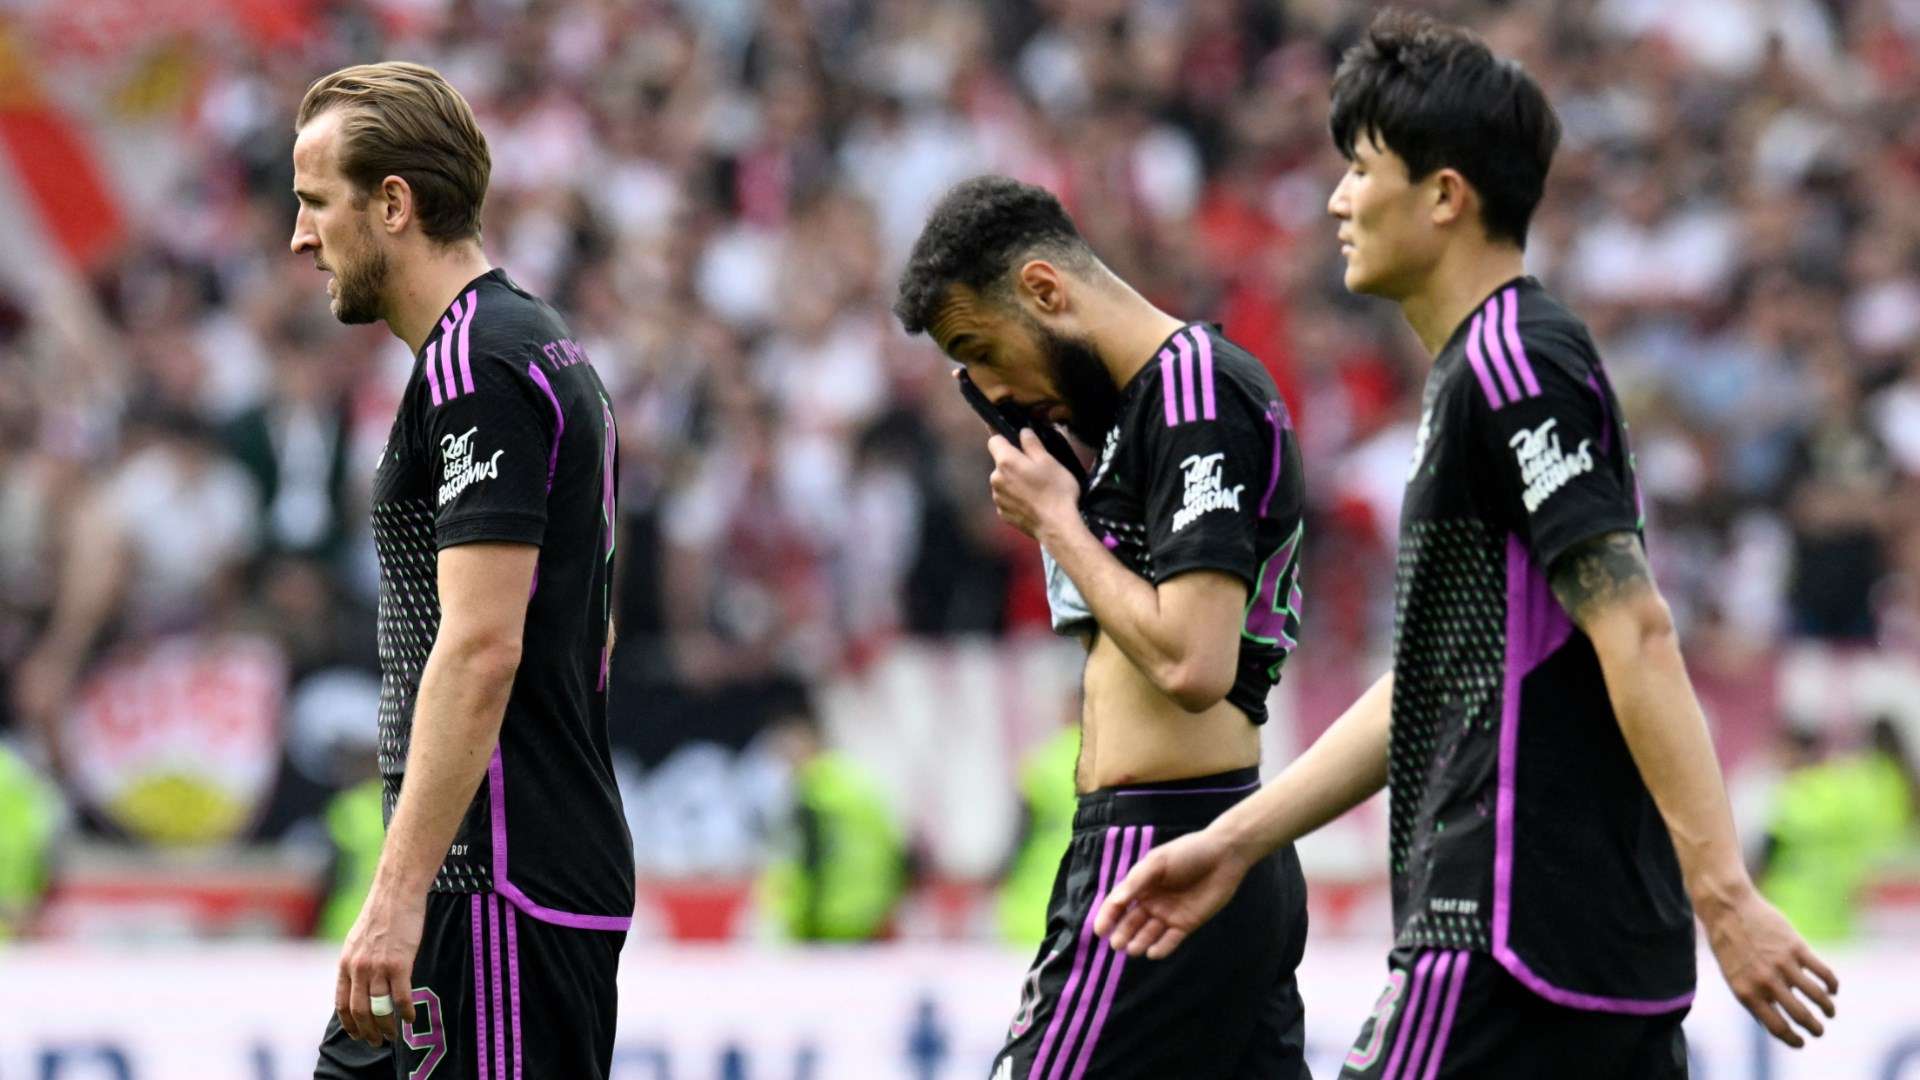 Bayern players look dejected after losing to Stuttgart